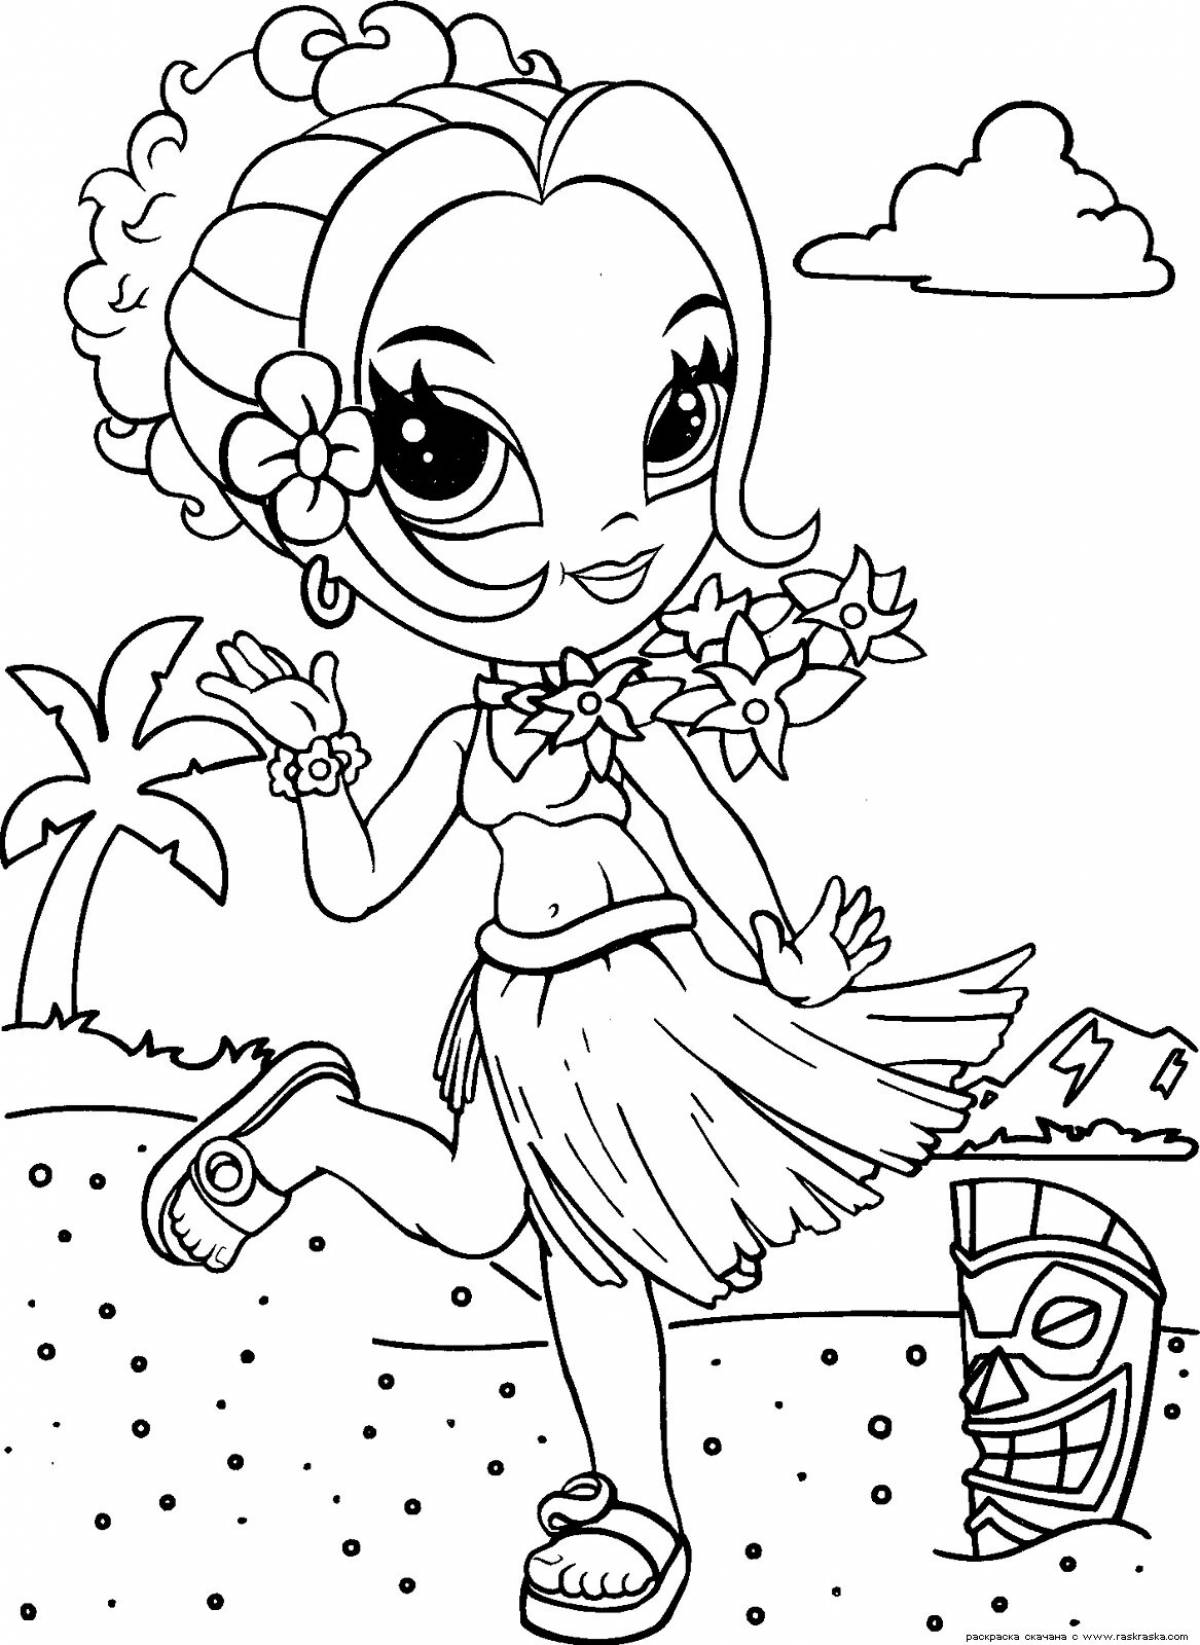 Stylish coloring book popular with kids